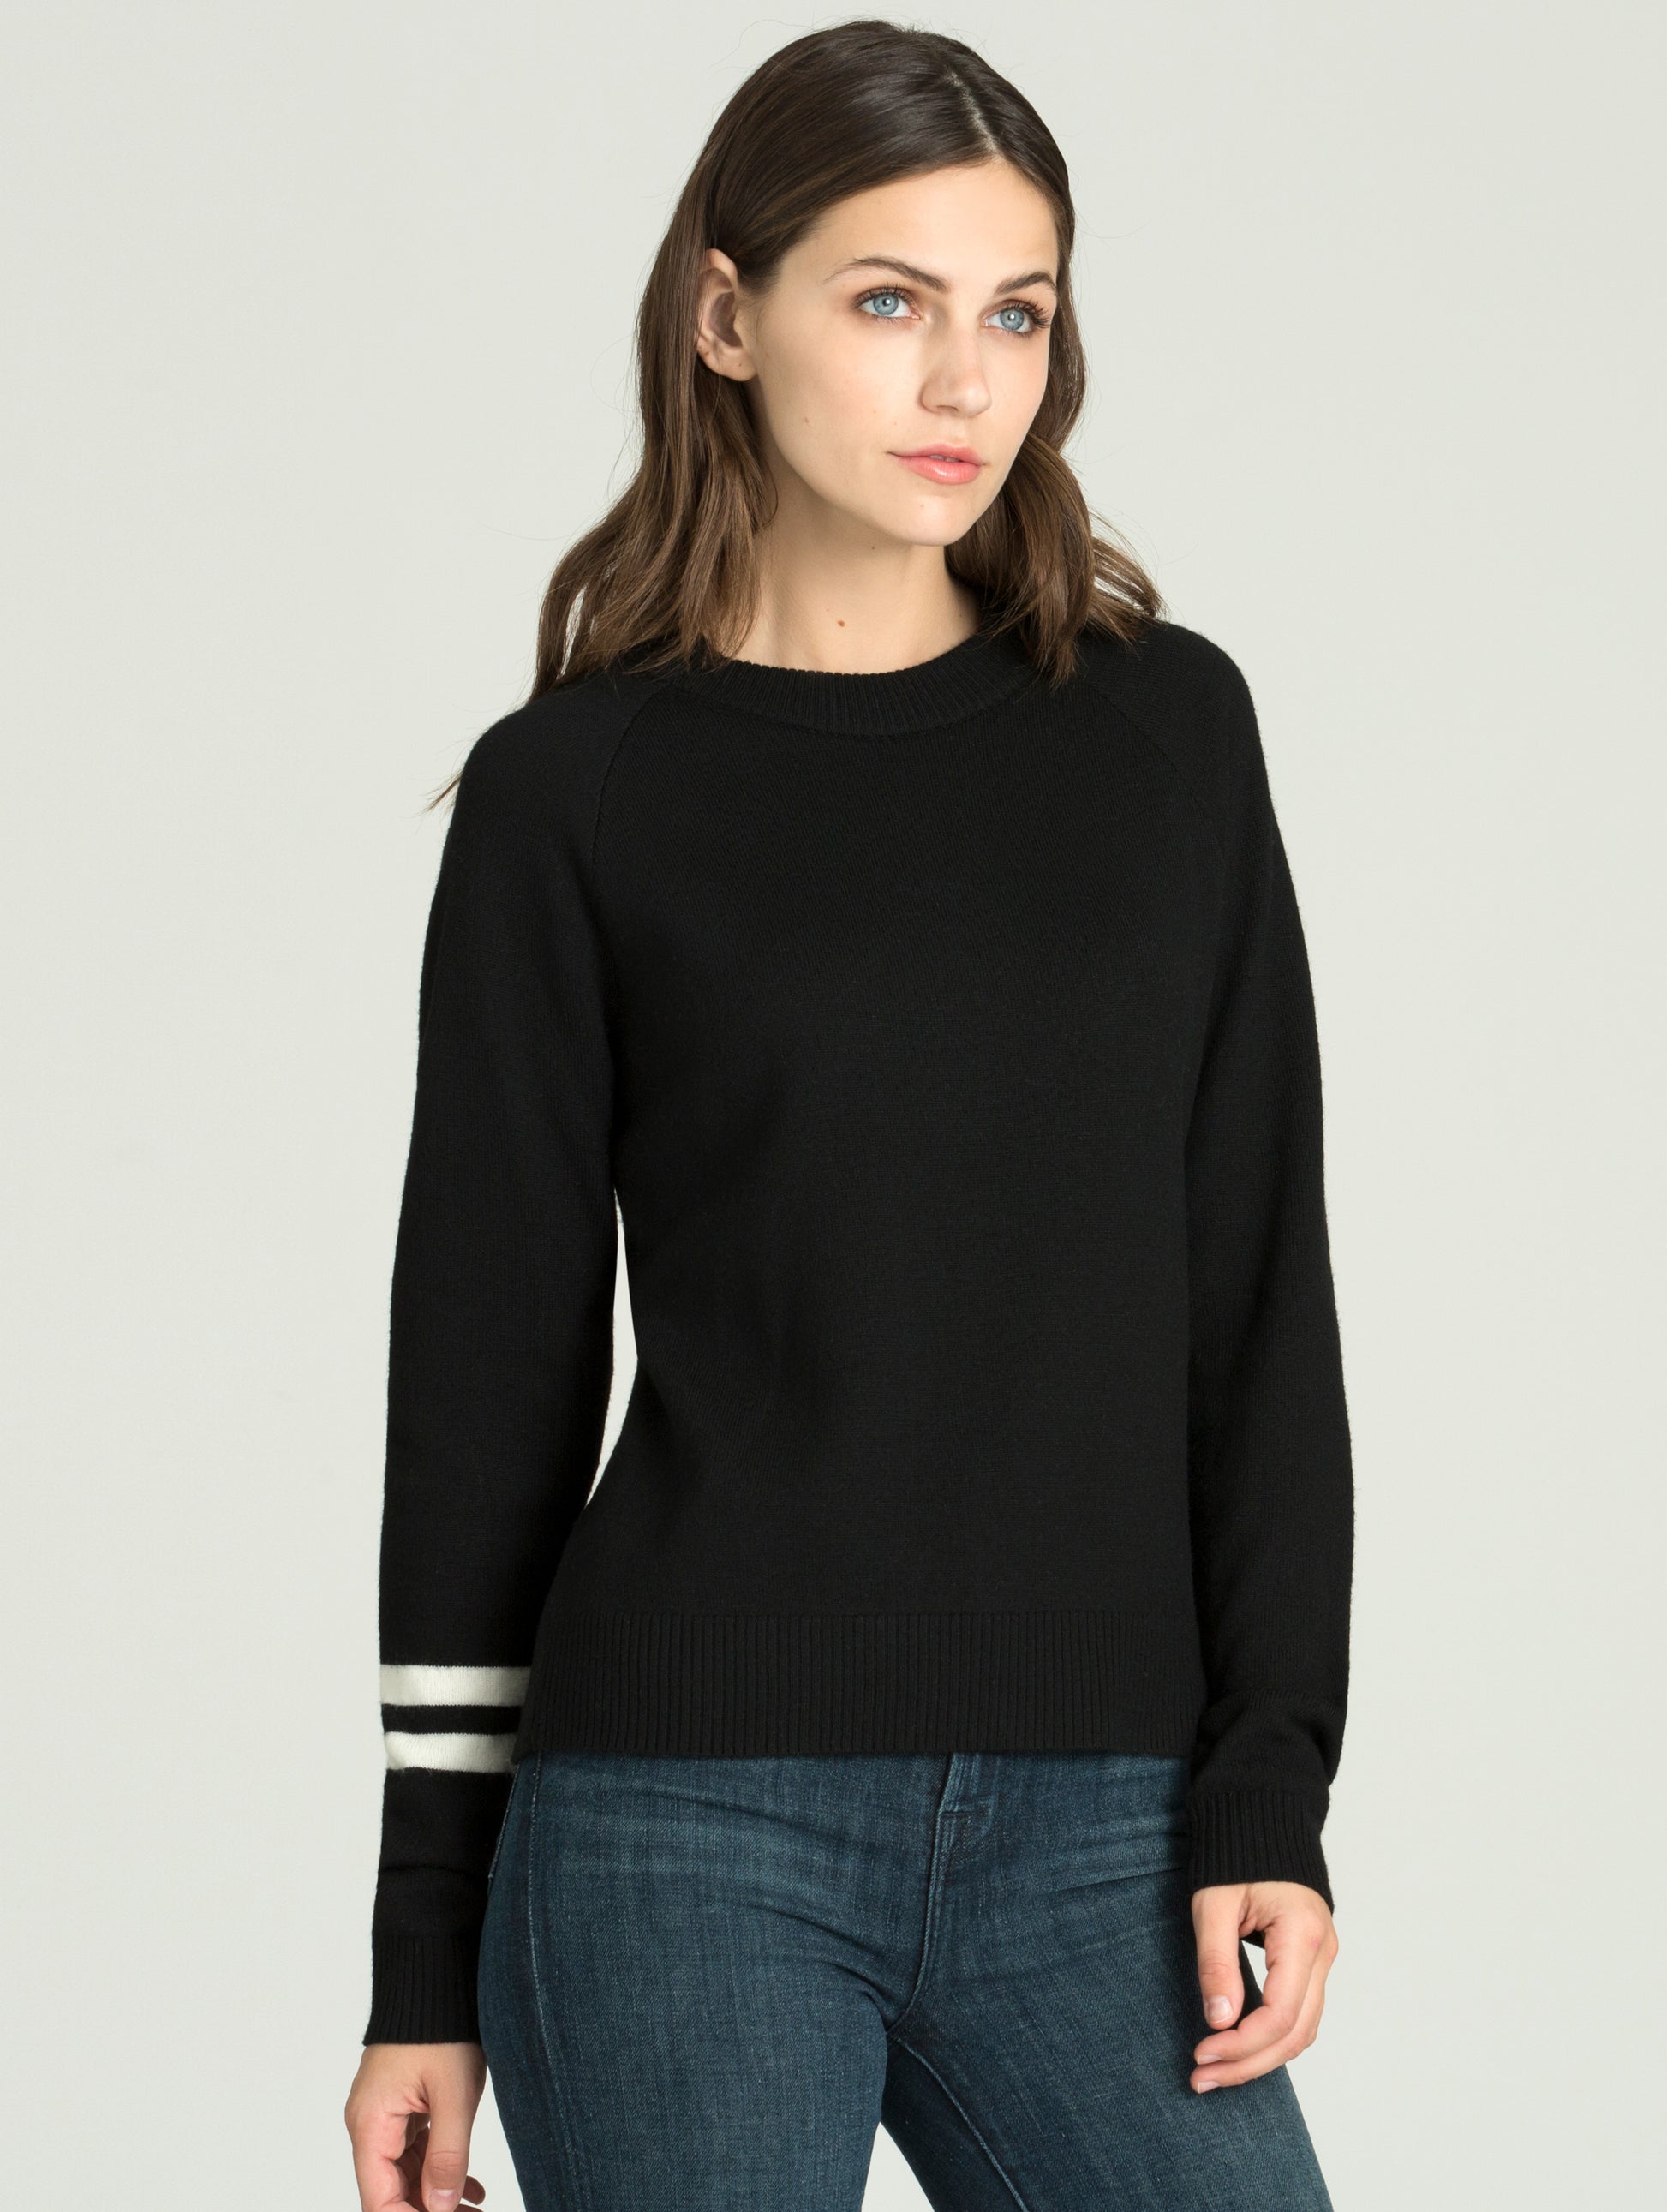 woman wearing black sweater from AETHER Apparel